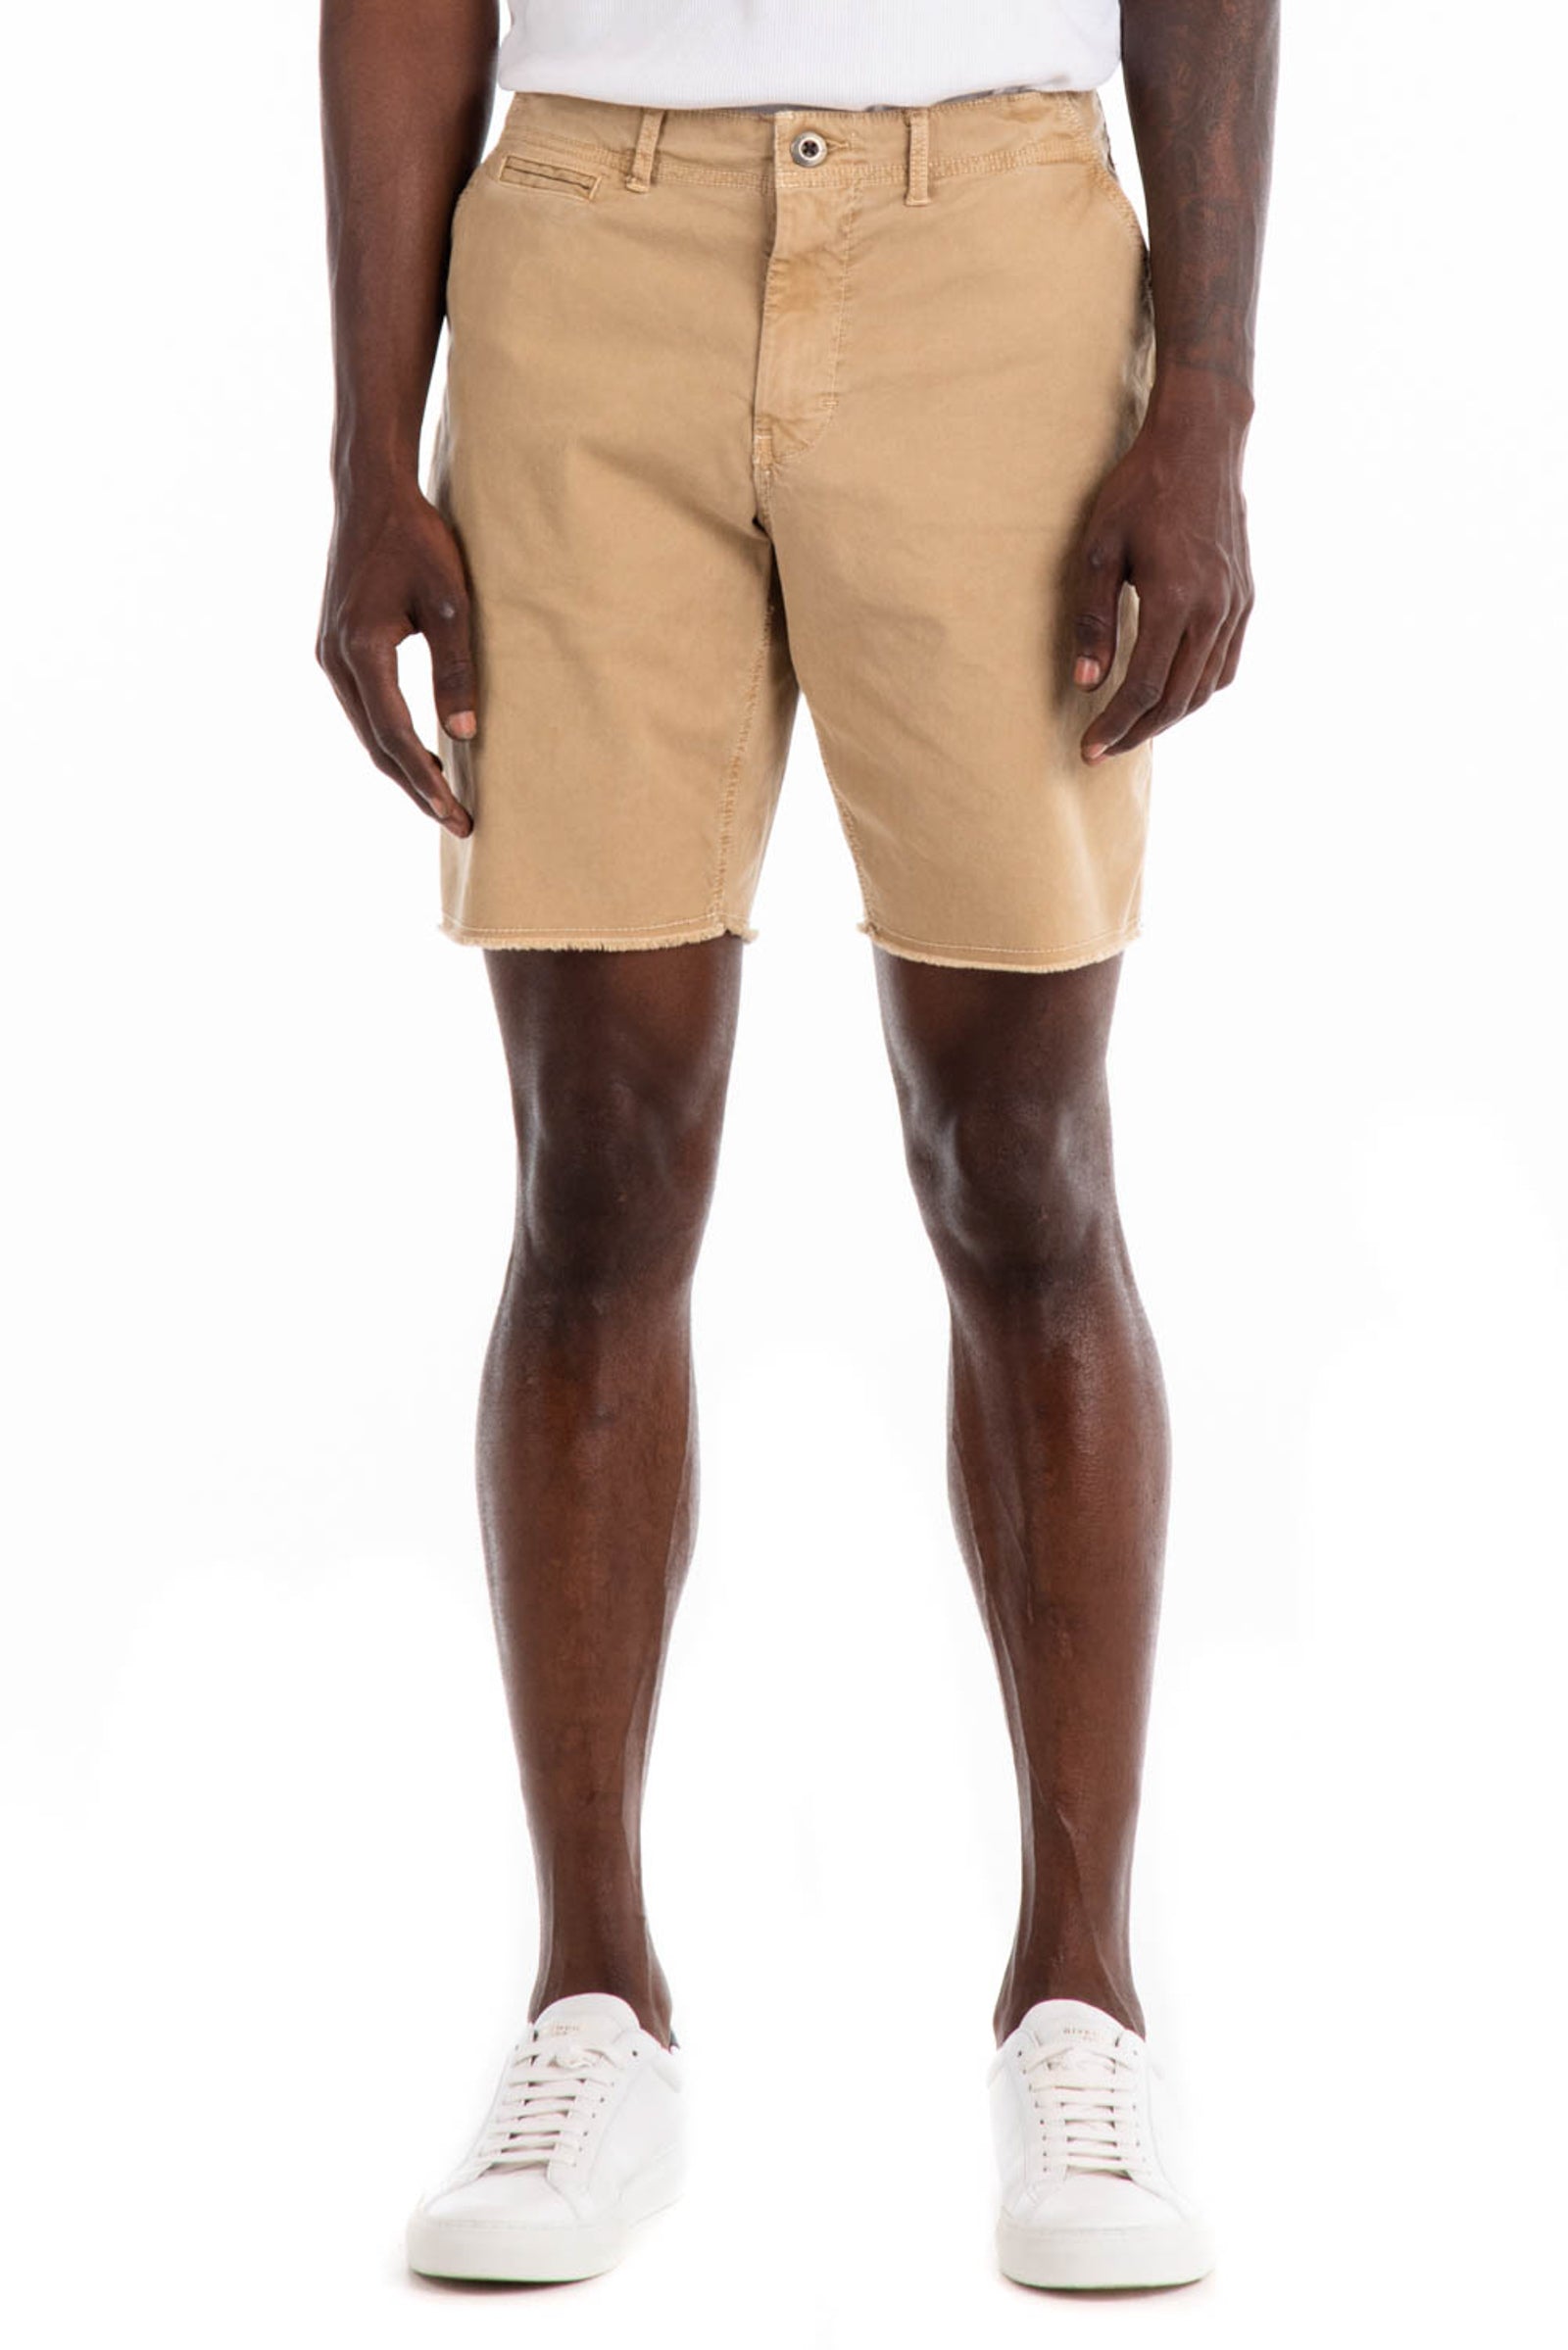 Original Paperbacks Brentwood Chino Short in Khaki on Model Cropped Front View